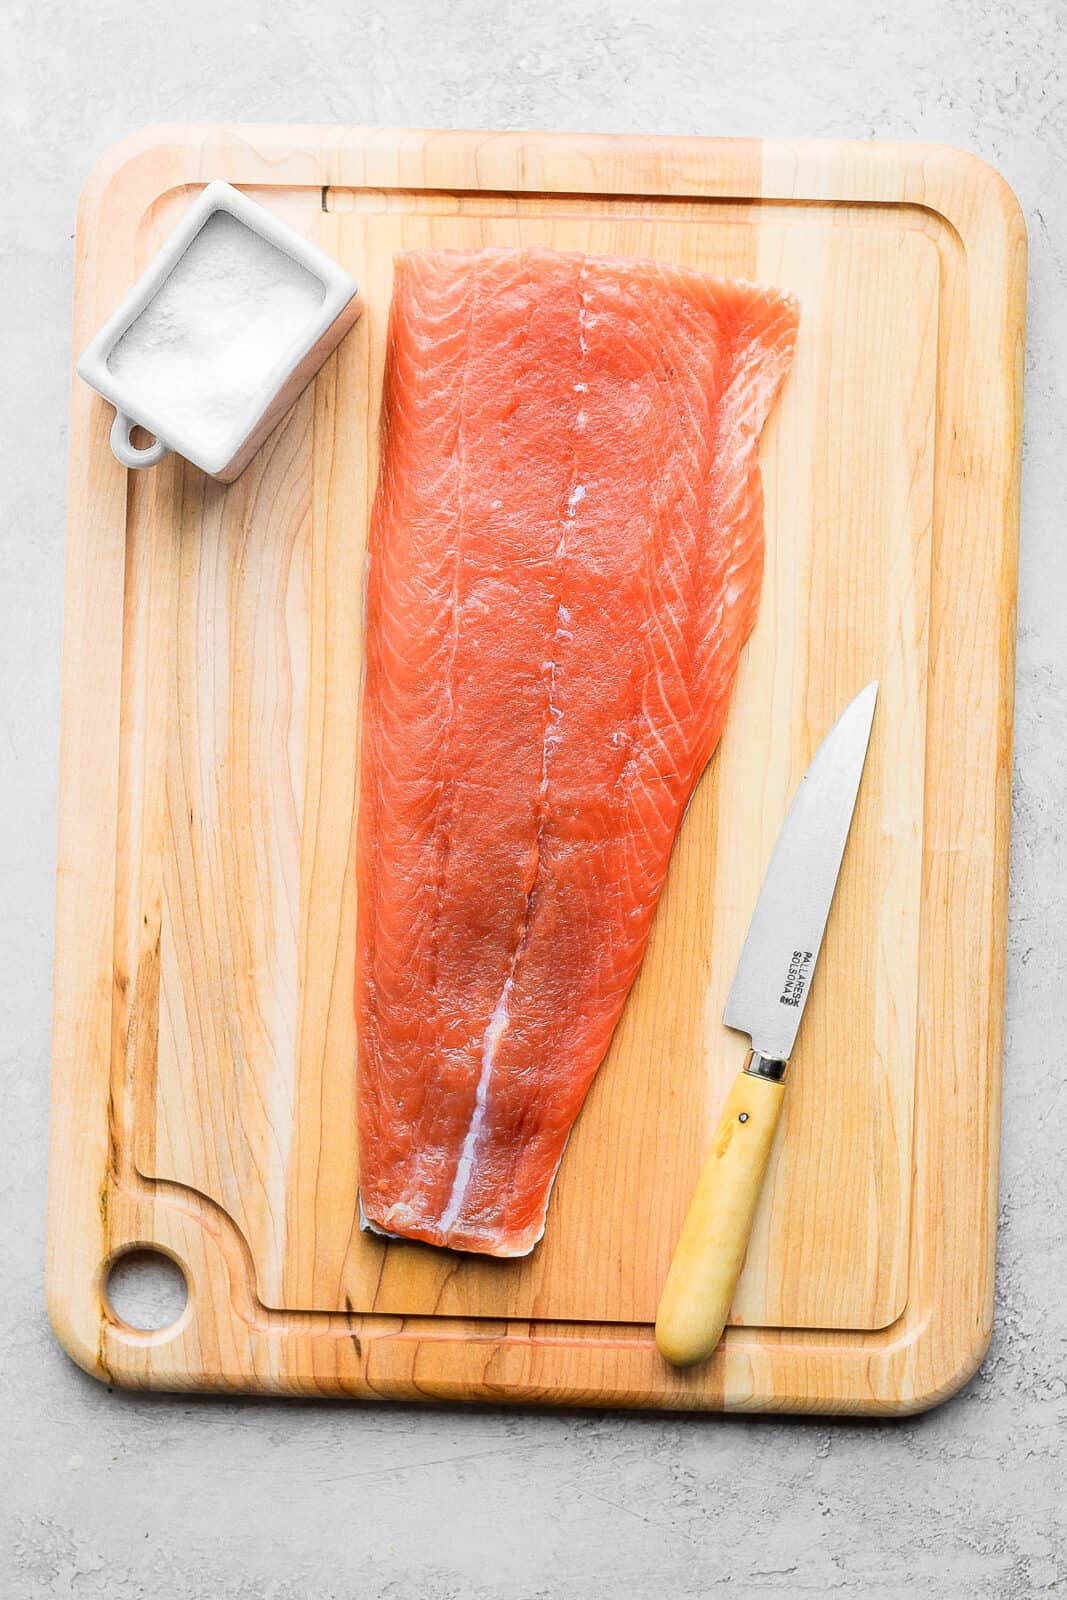 Cured salmon on a wooden cutting board with a knife next to it. 